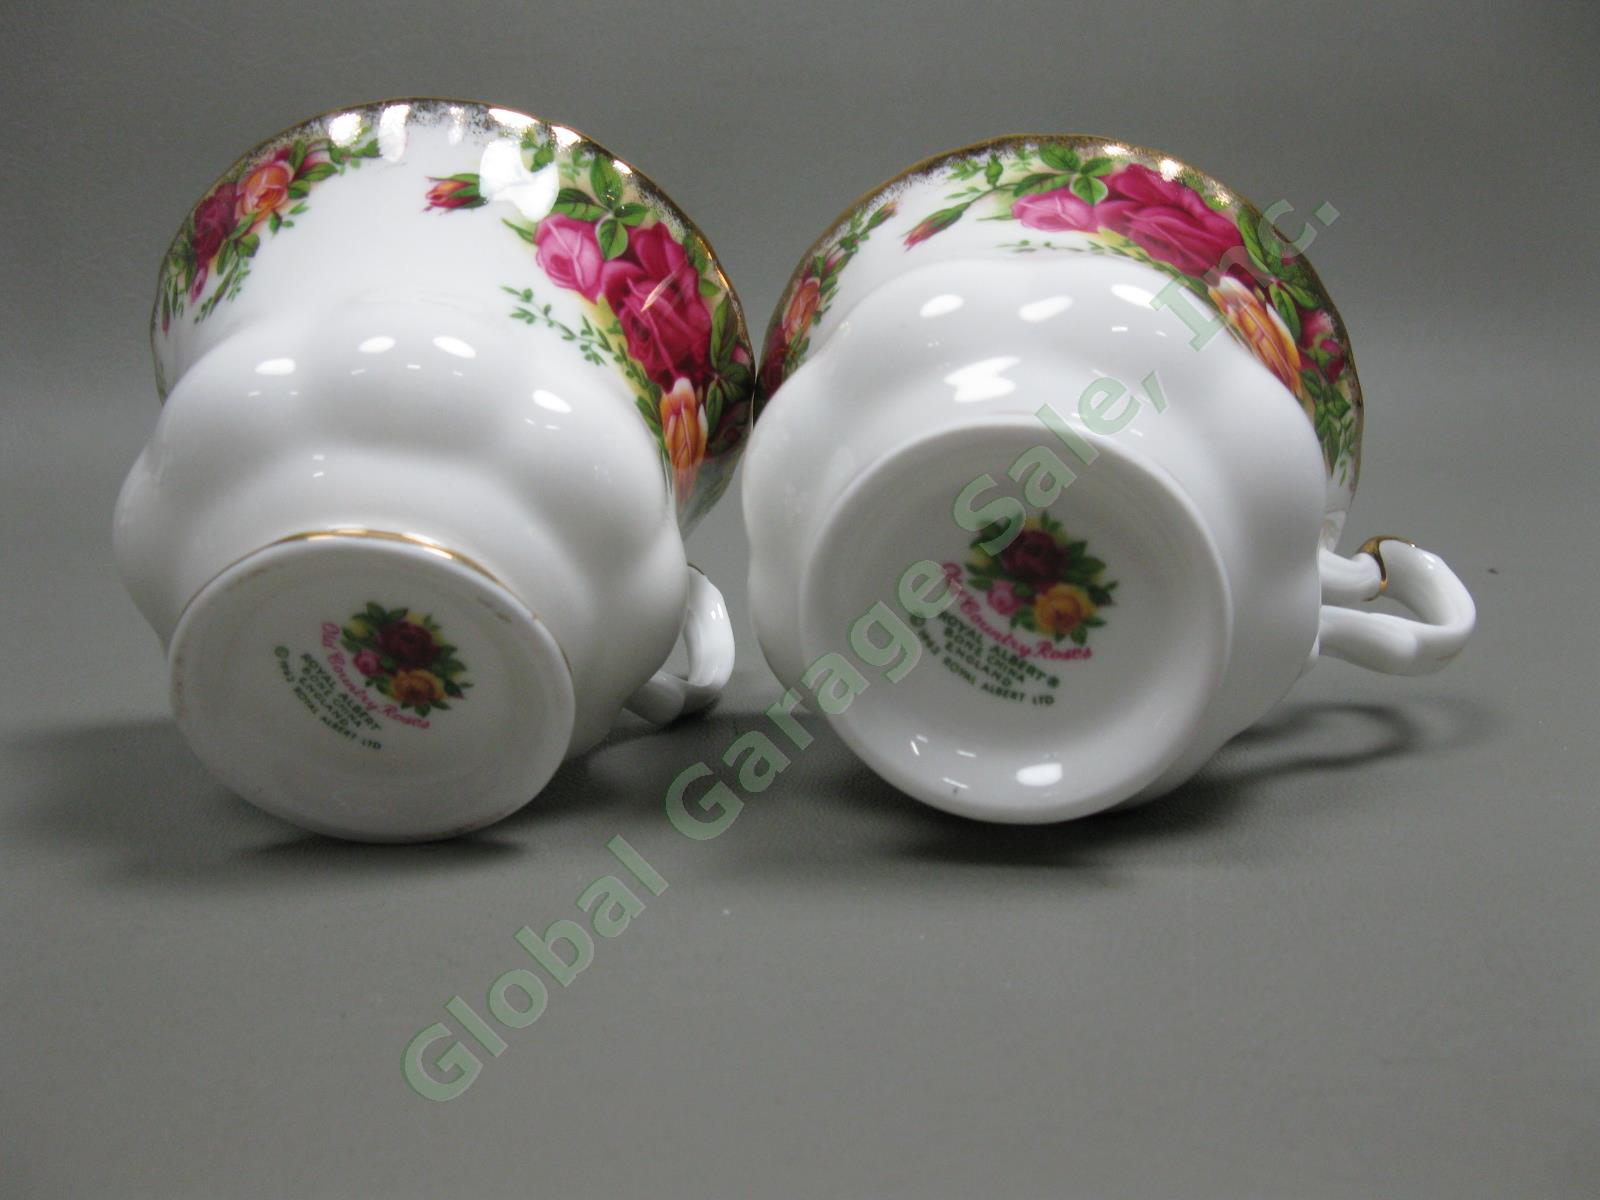 8 Royal Albert Old Country Roses Footed Tea Cup/Saucer Gold Trim Bone China Set 18